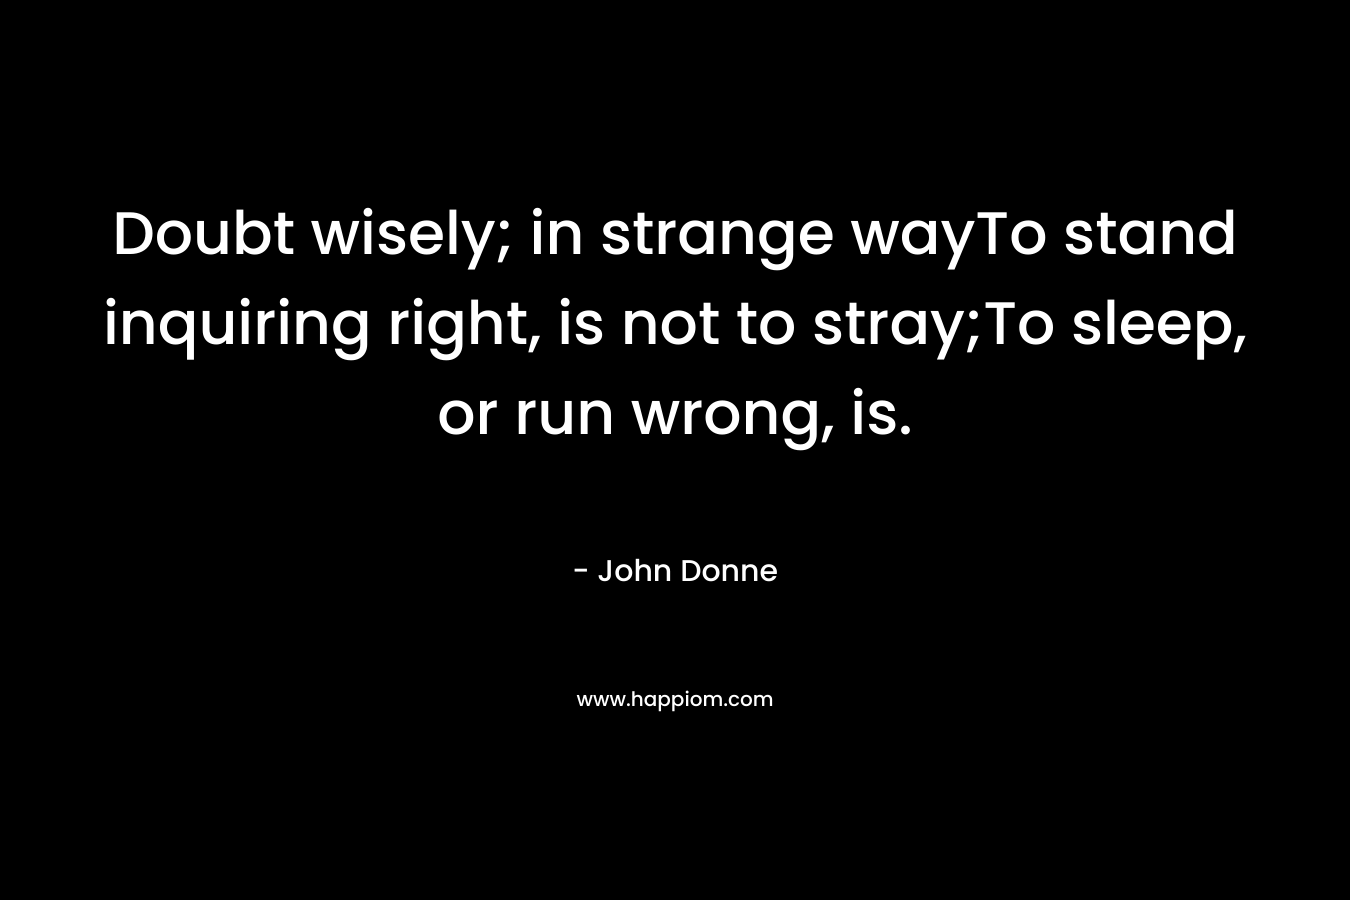 Doubt wisely; in strange wayTo stand inquiring right, is not to stray;To sleep, or run wrong, is. – John Donne